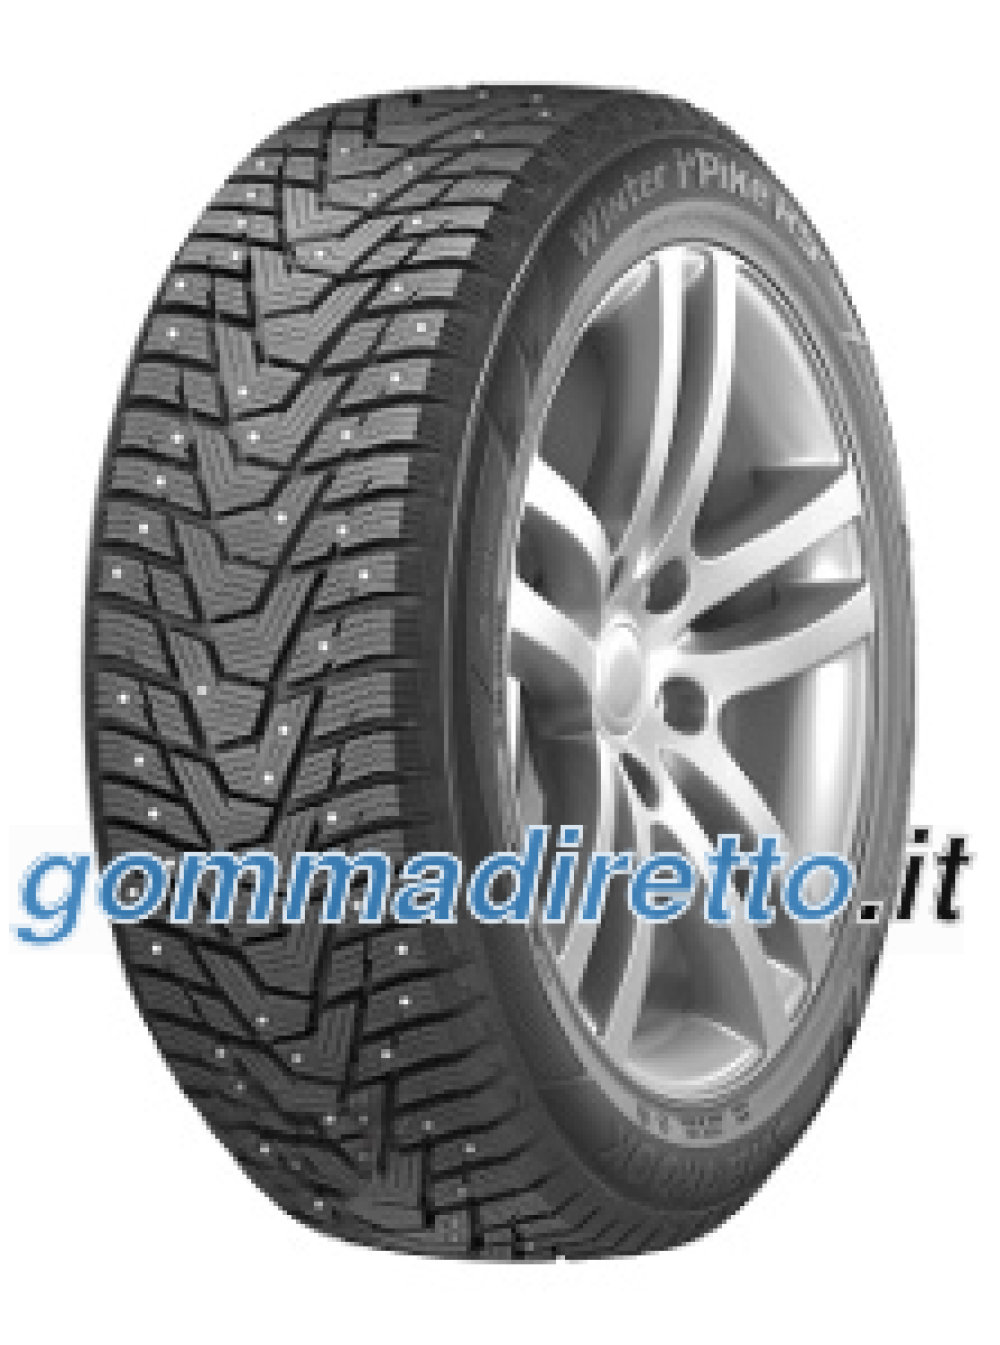 Image of Hankook Winter I*Pike RS2 W429 ( 215/65 R15 100T XL, pneumatico chiodato SBL )